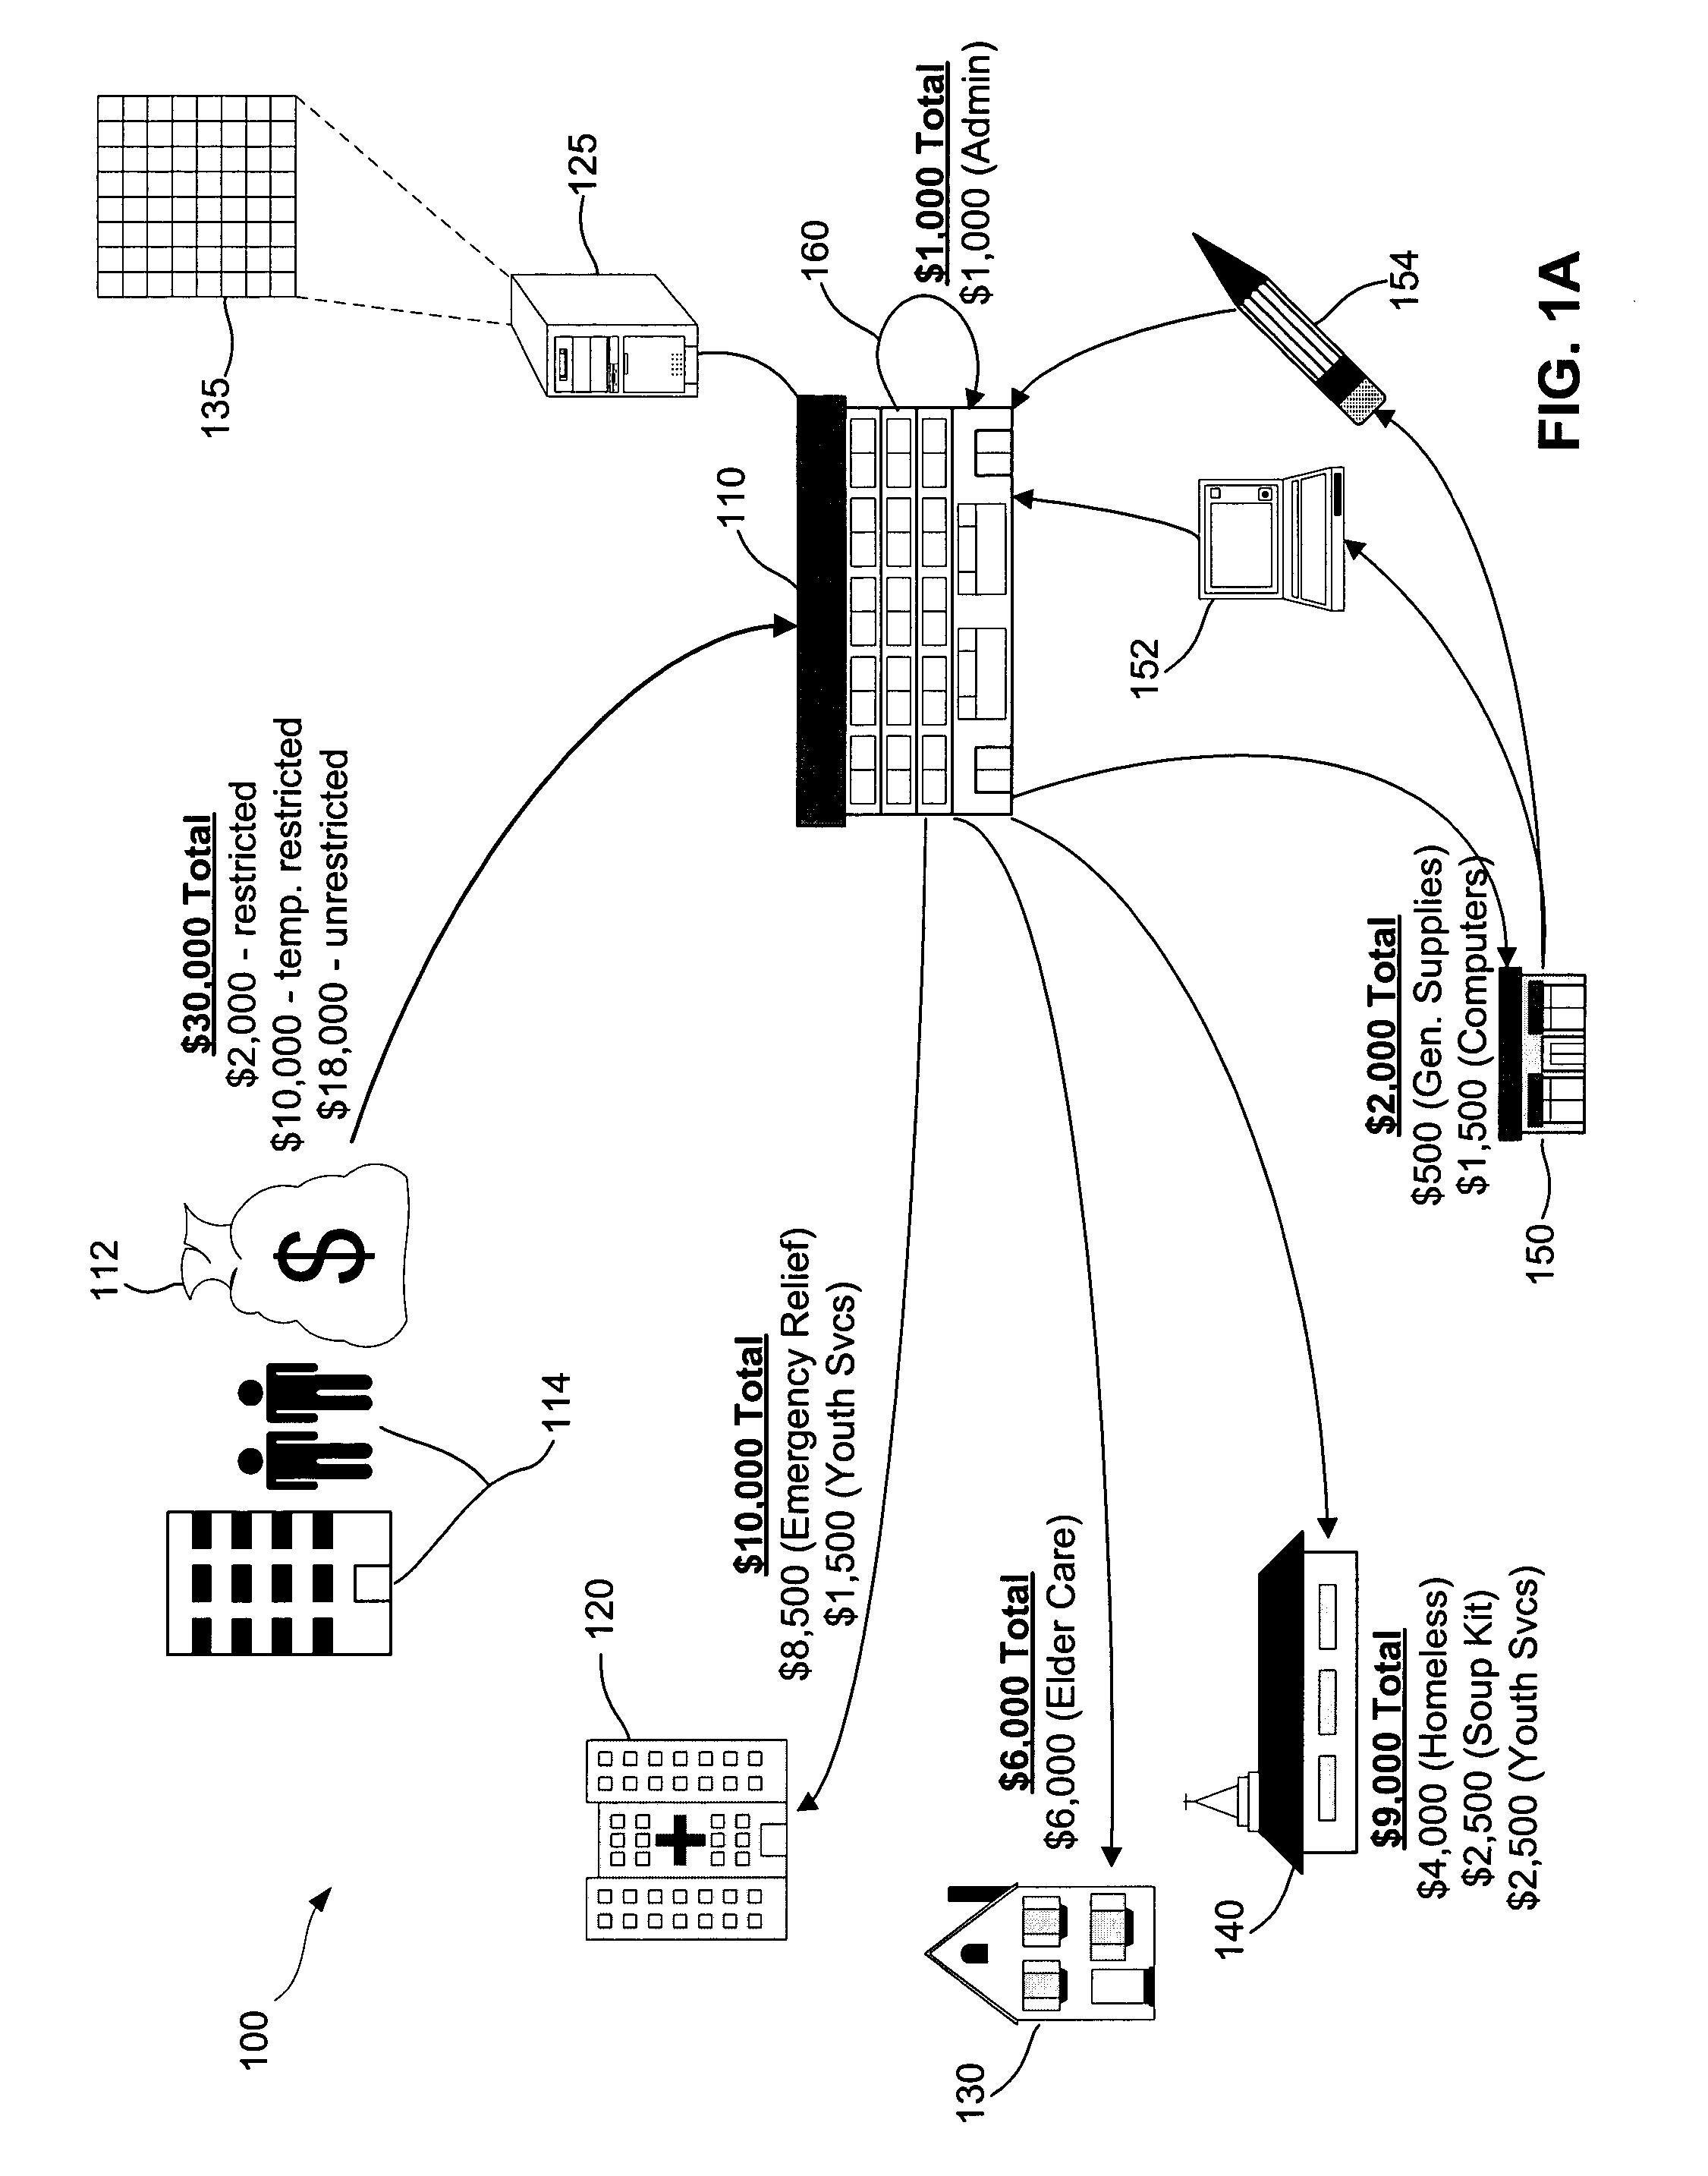 Method for tracking transactions in a not-for-profit accounting system